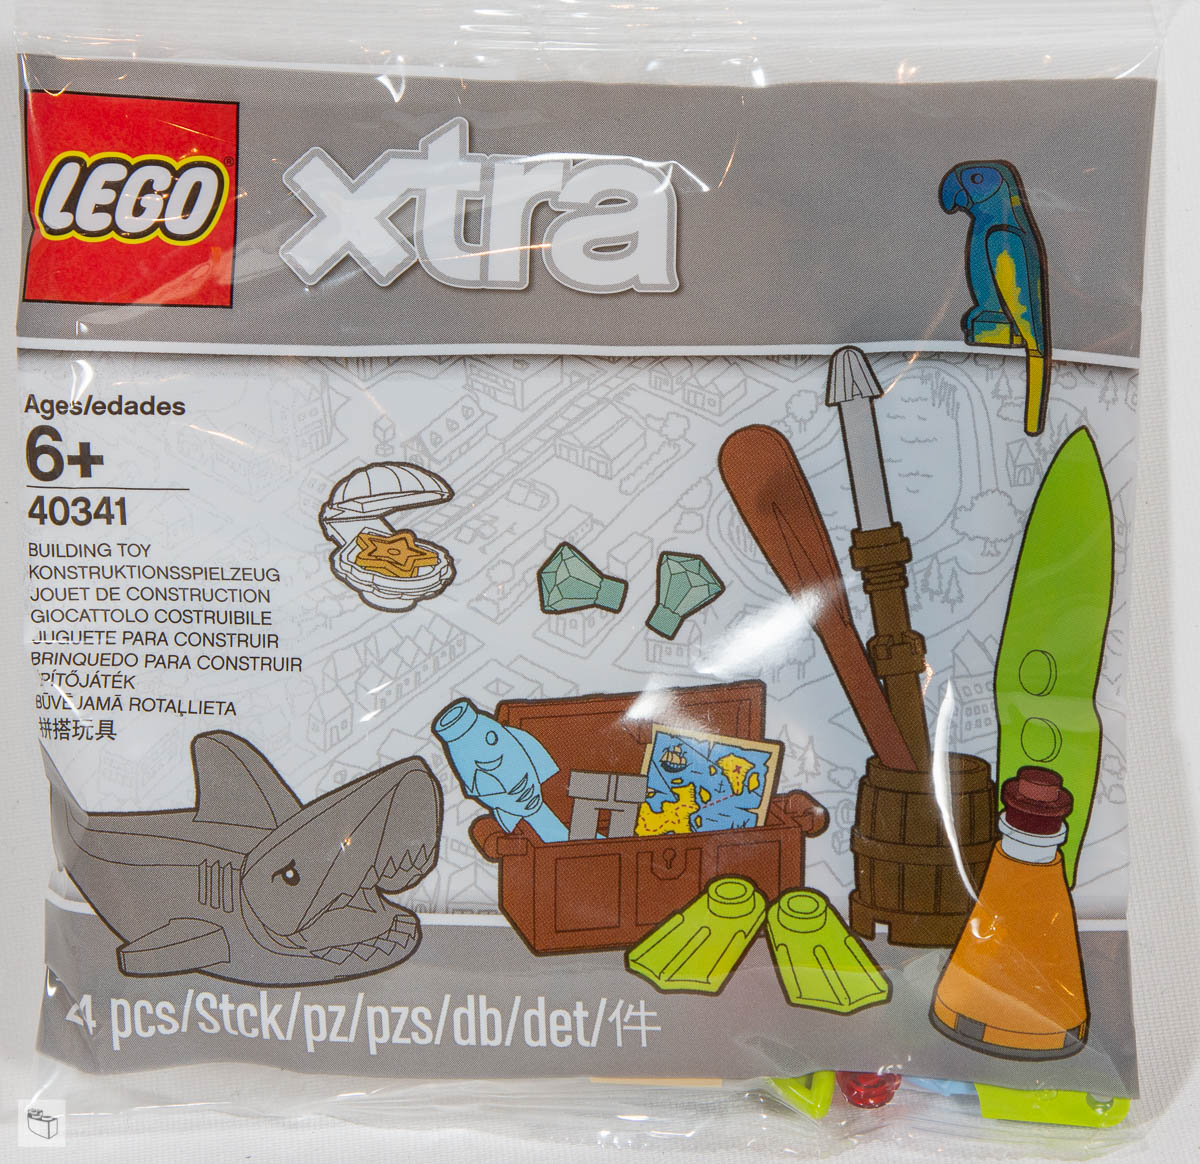 Lego Xtra Sea Accessories 40341 New Polybag 24pc Ocean Fish Clam Parrot Chest